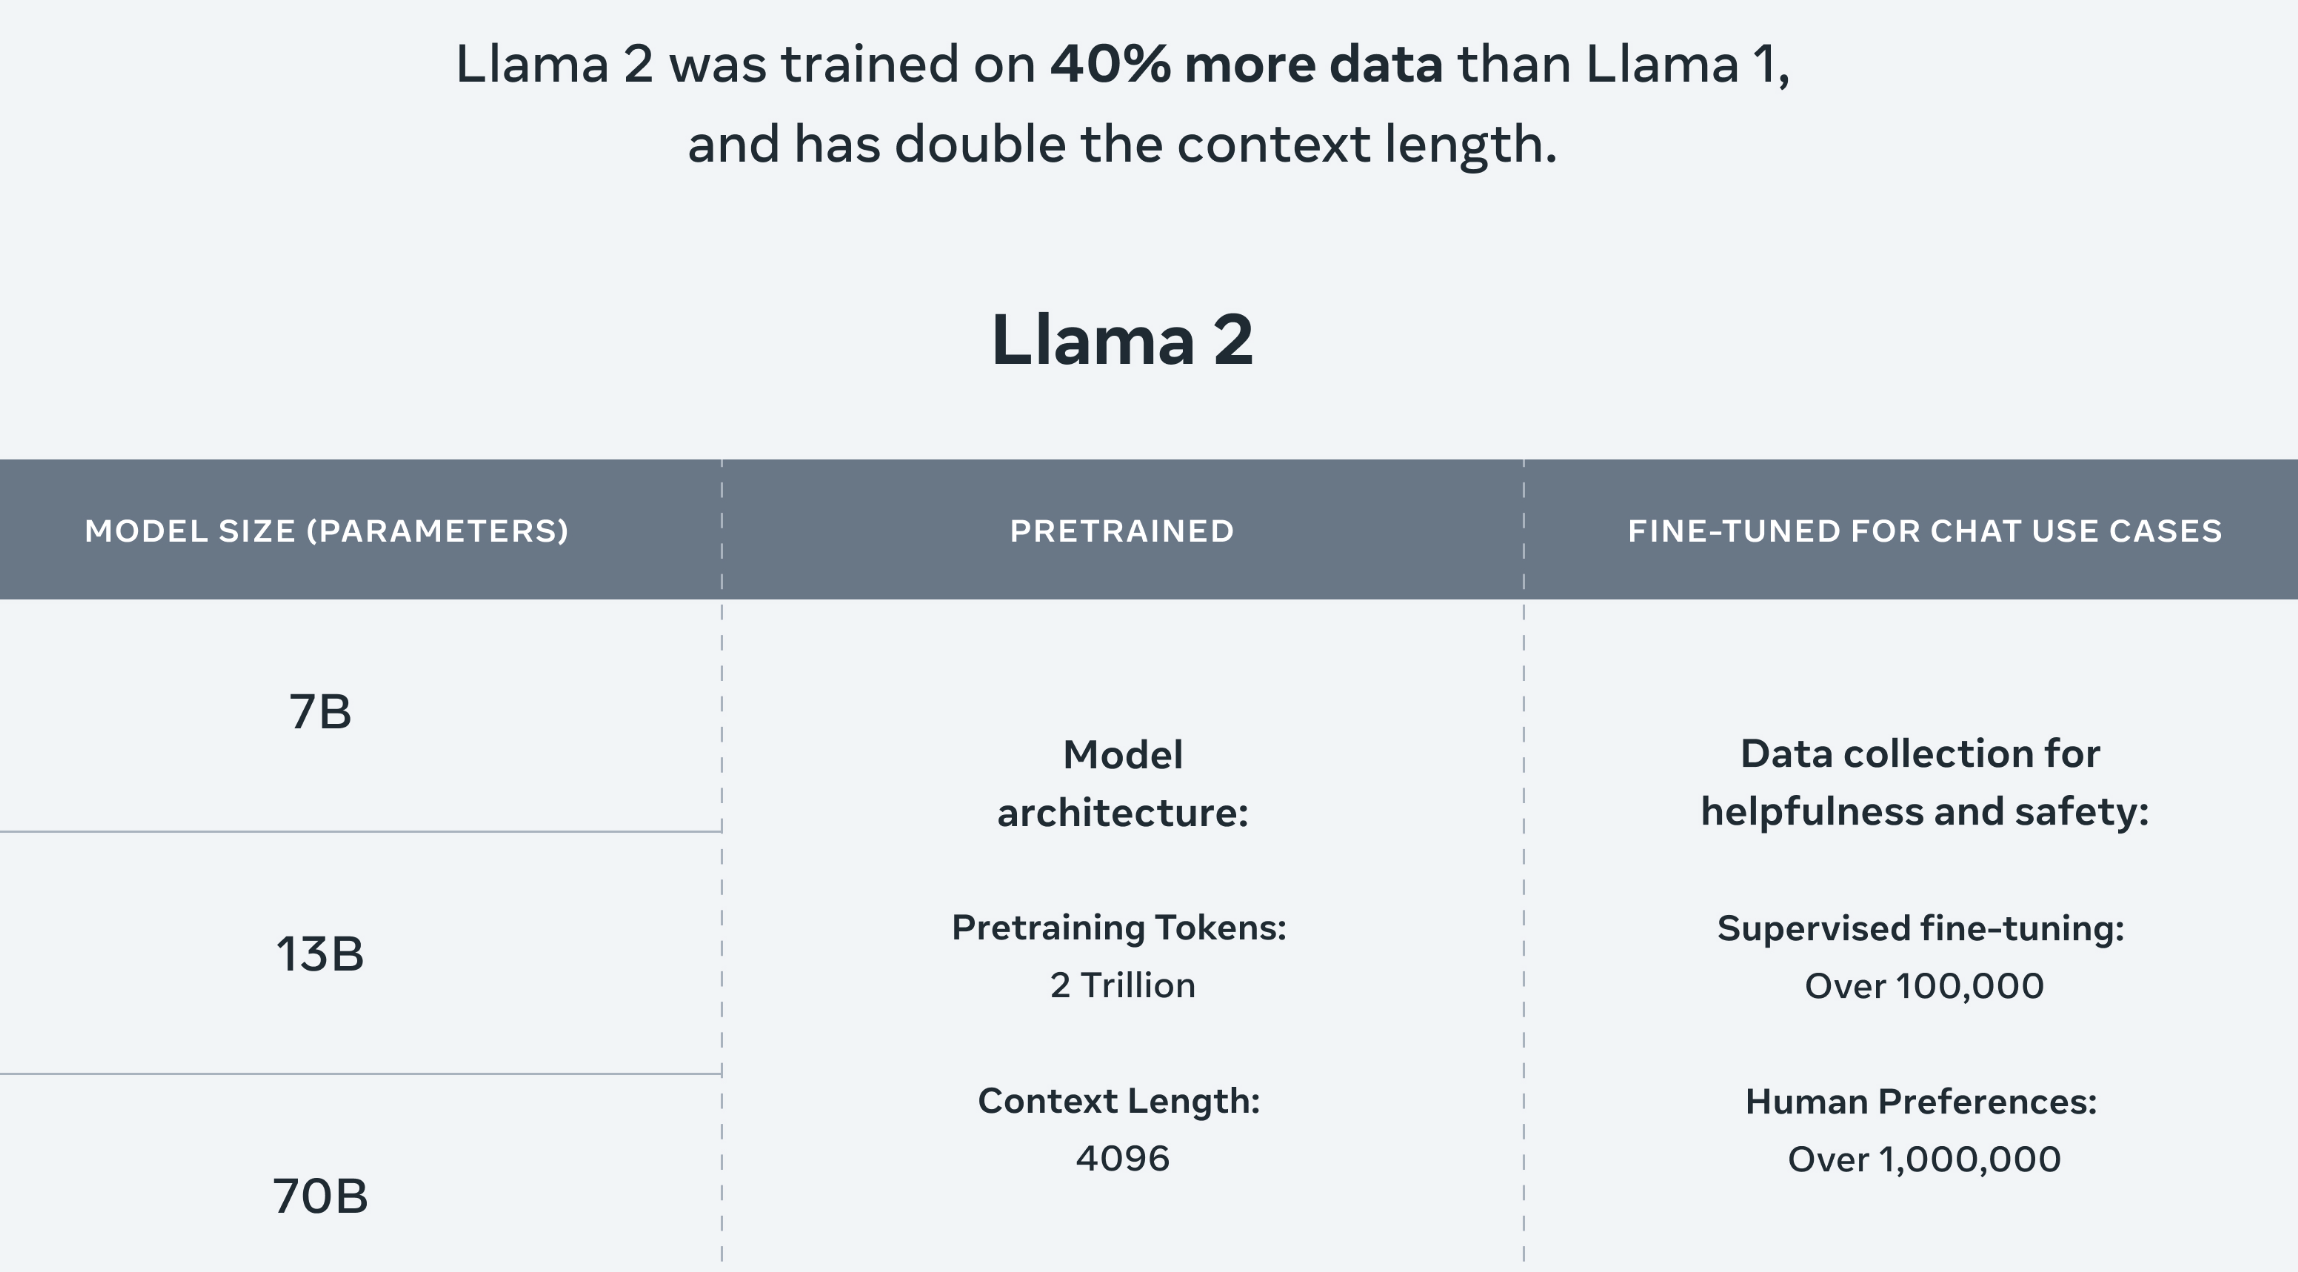 Meta And Microsoft Release Llama 2 Free For Commercial Use And Research